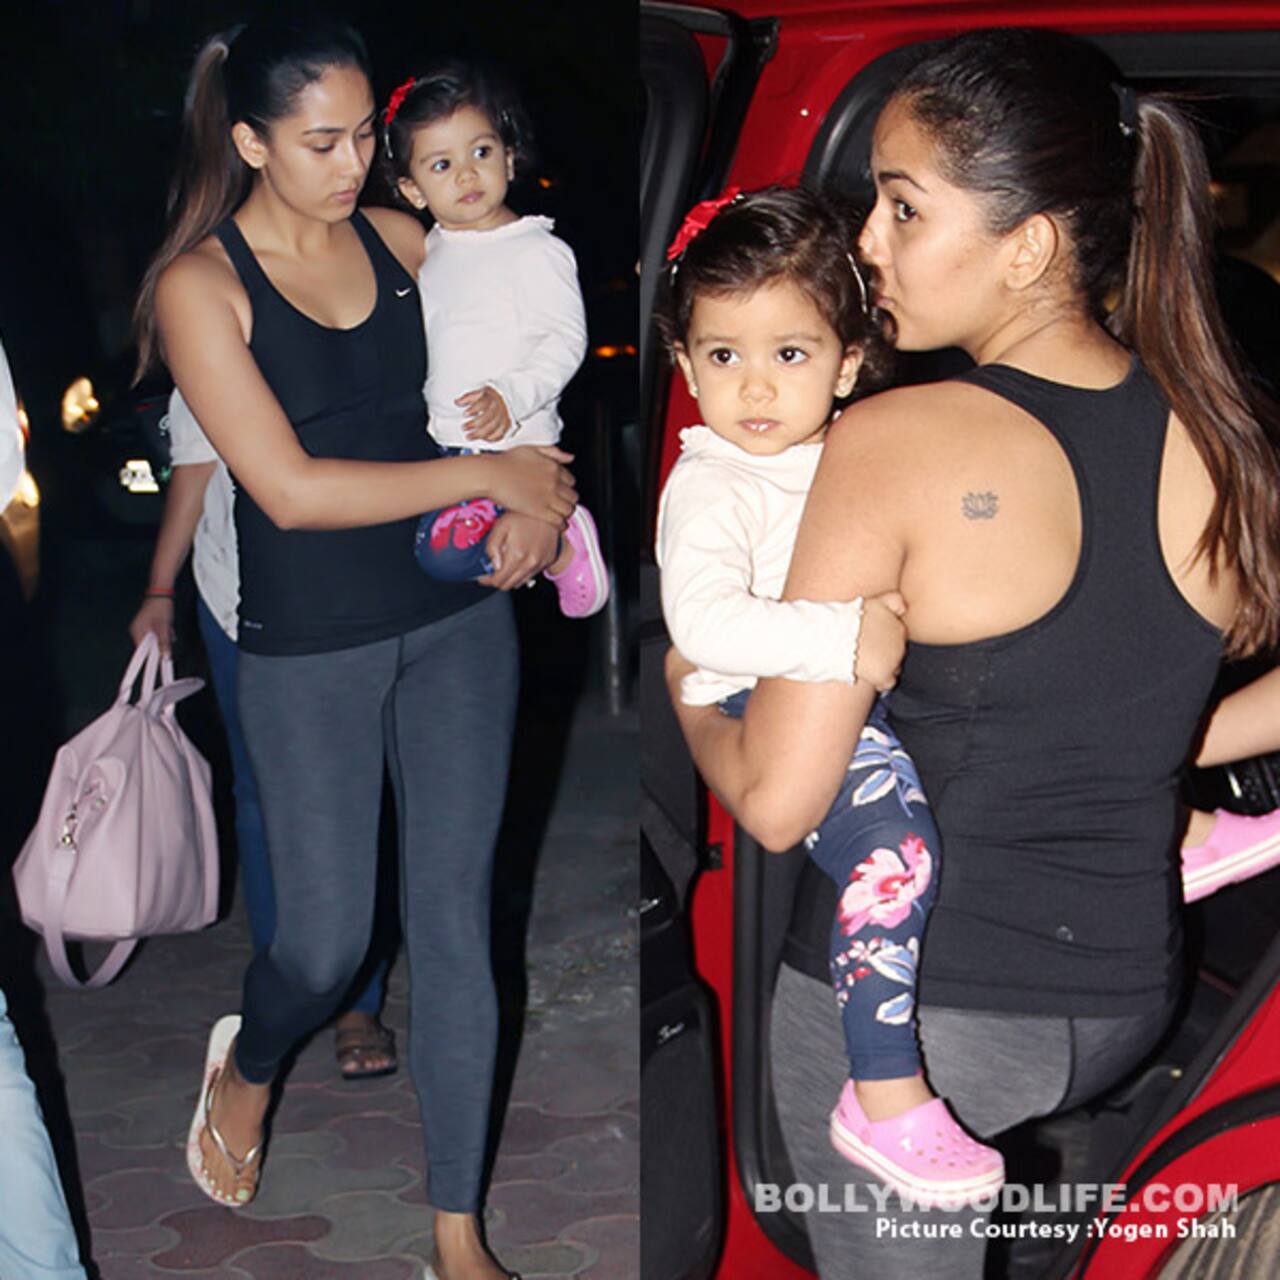 Did you know Mira Rajput has a tattoo on her back? - view pics